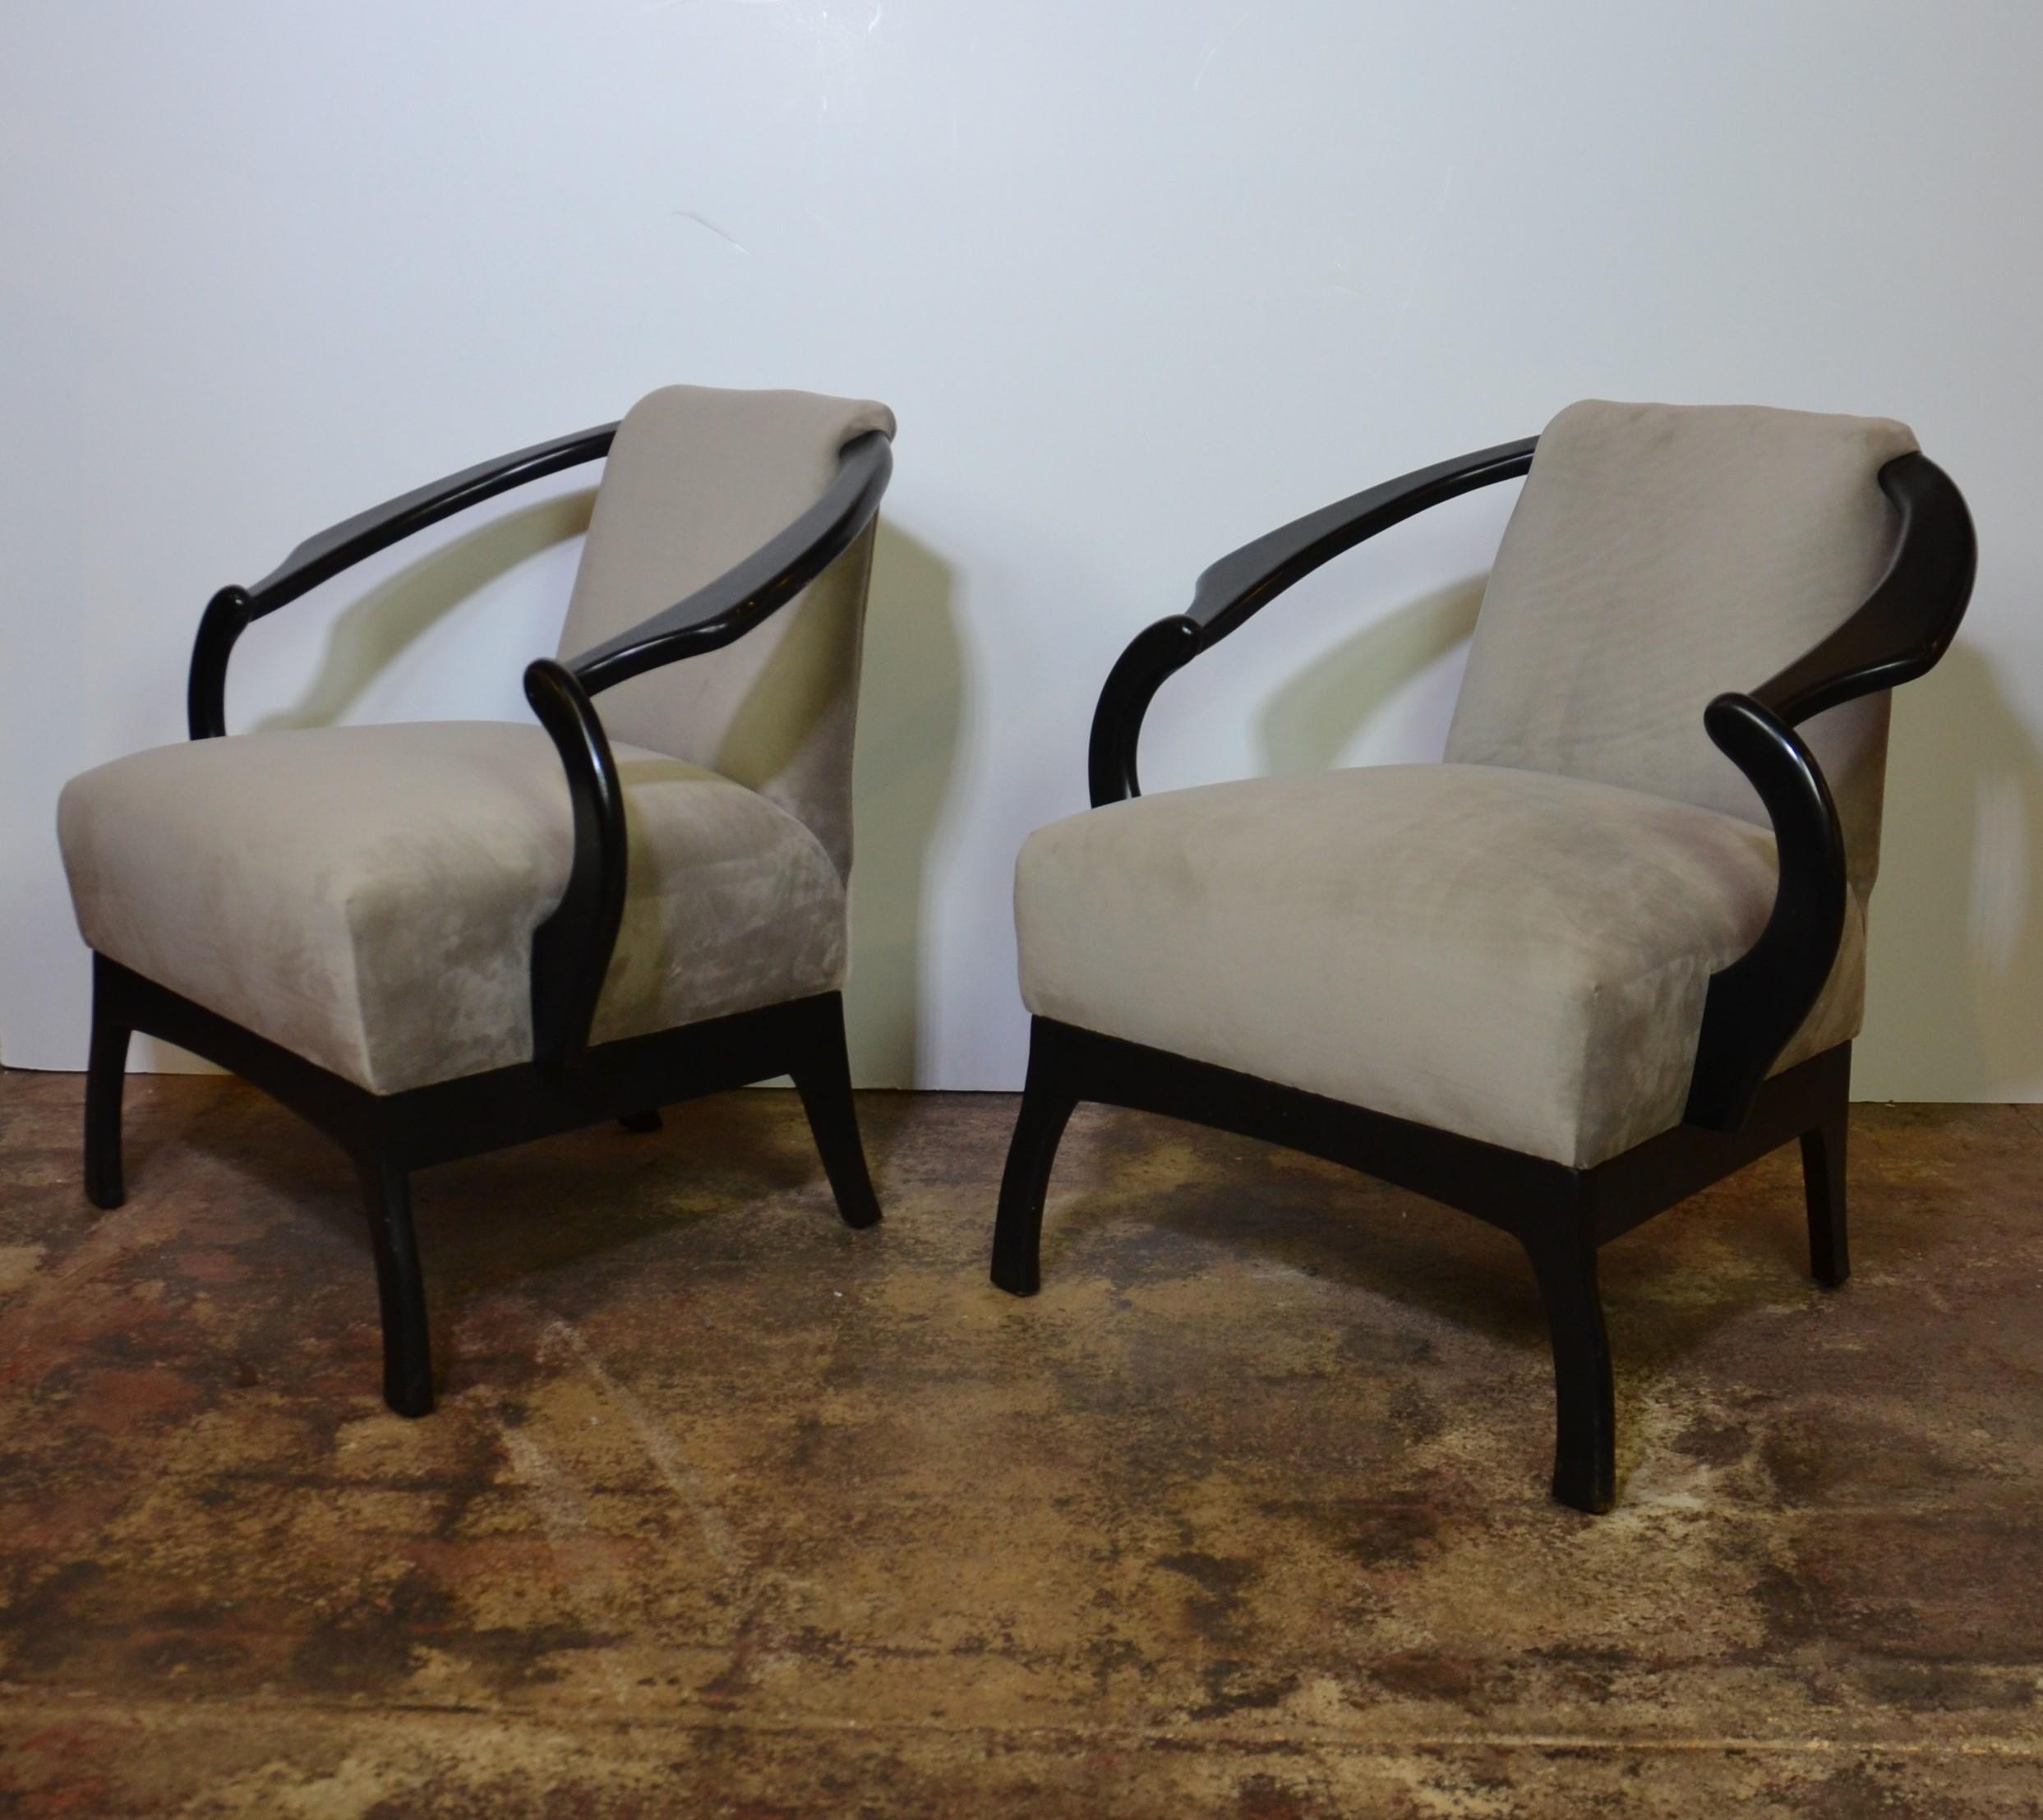 American Pair of Modern Chairs S/2